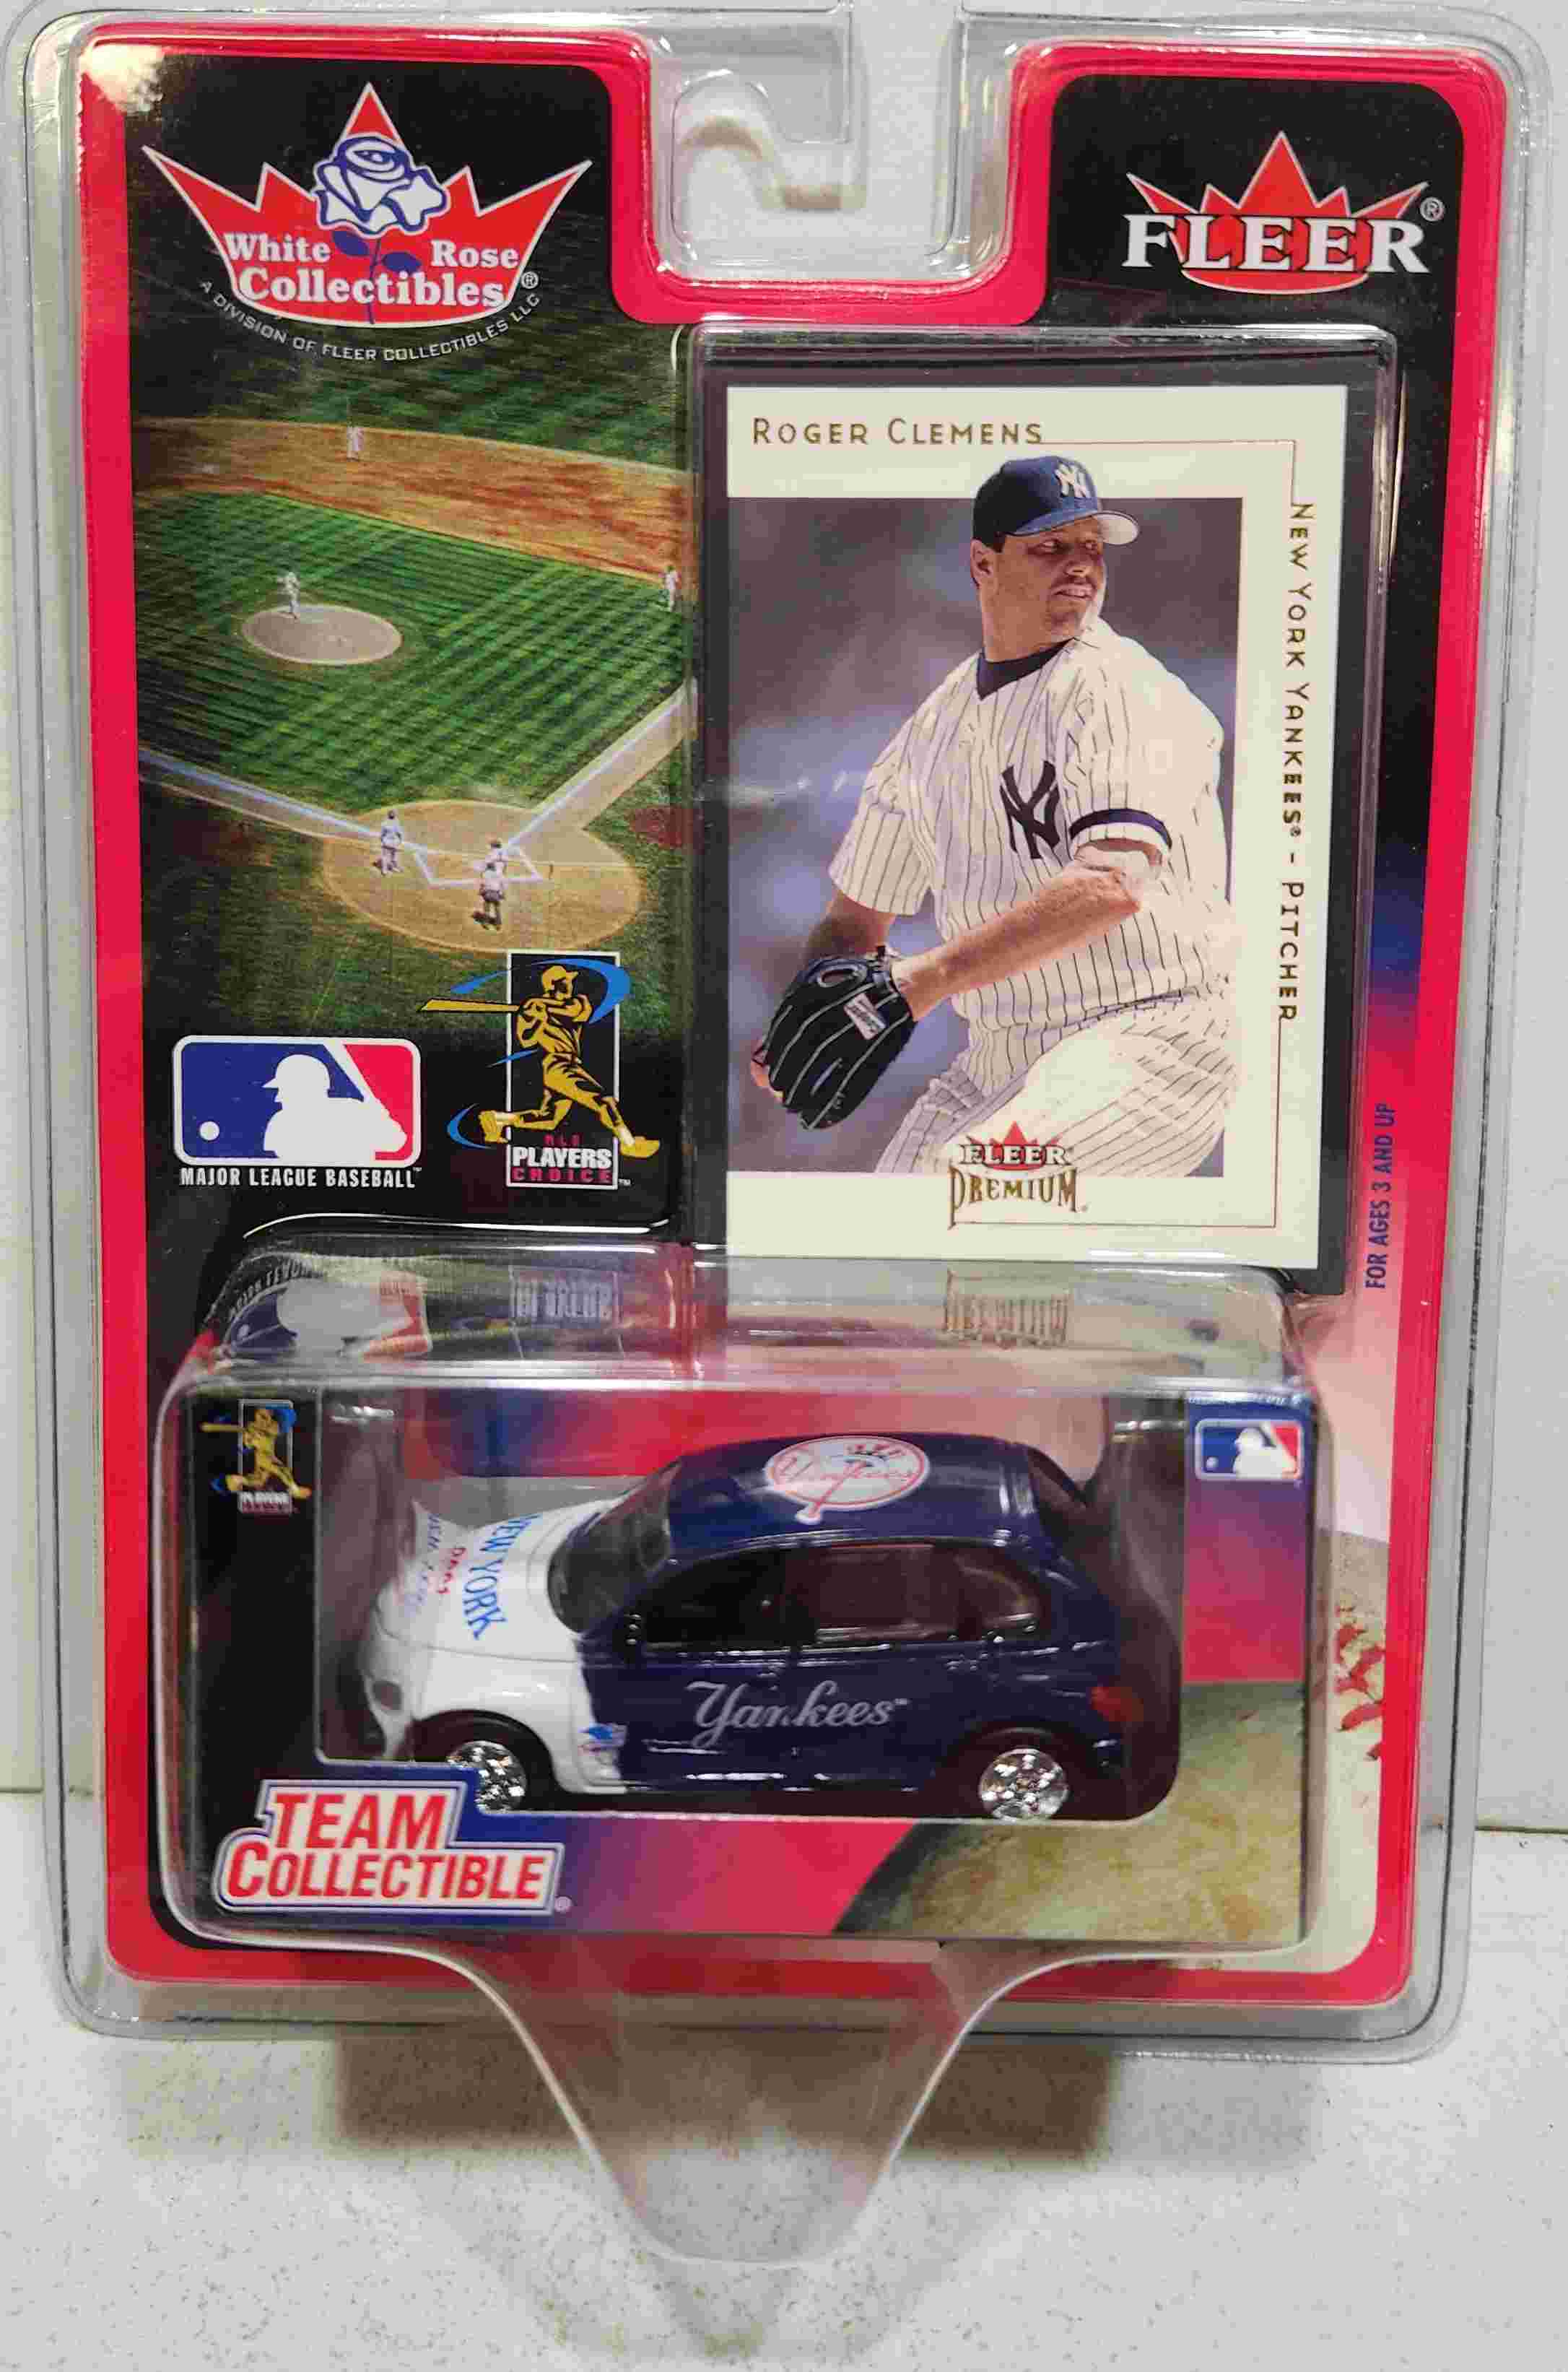 2001 NY Yankees 1/64th PT Cruiser with Roger Clemens trading card